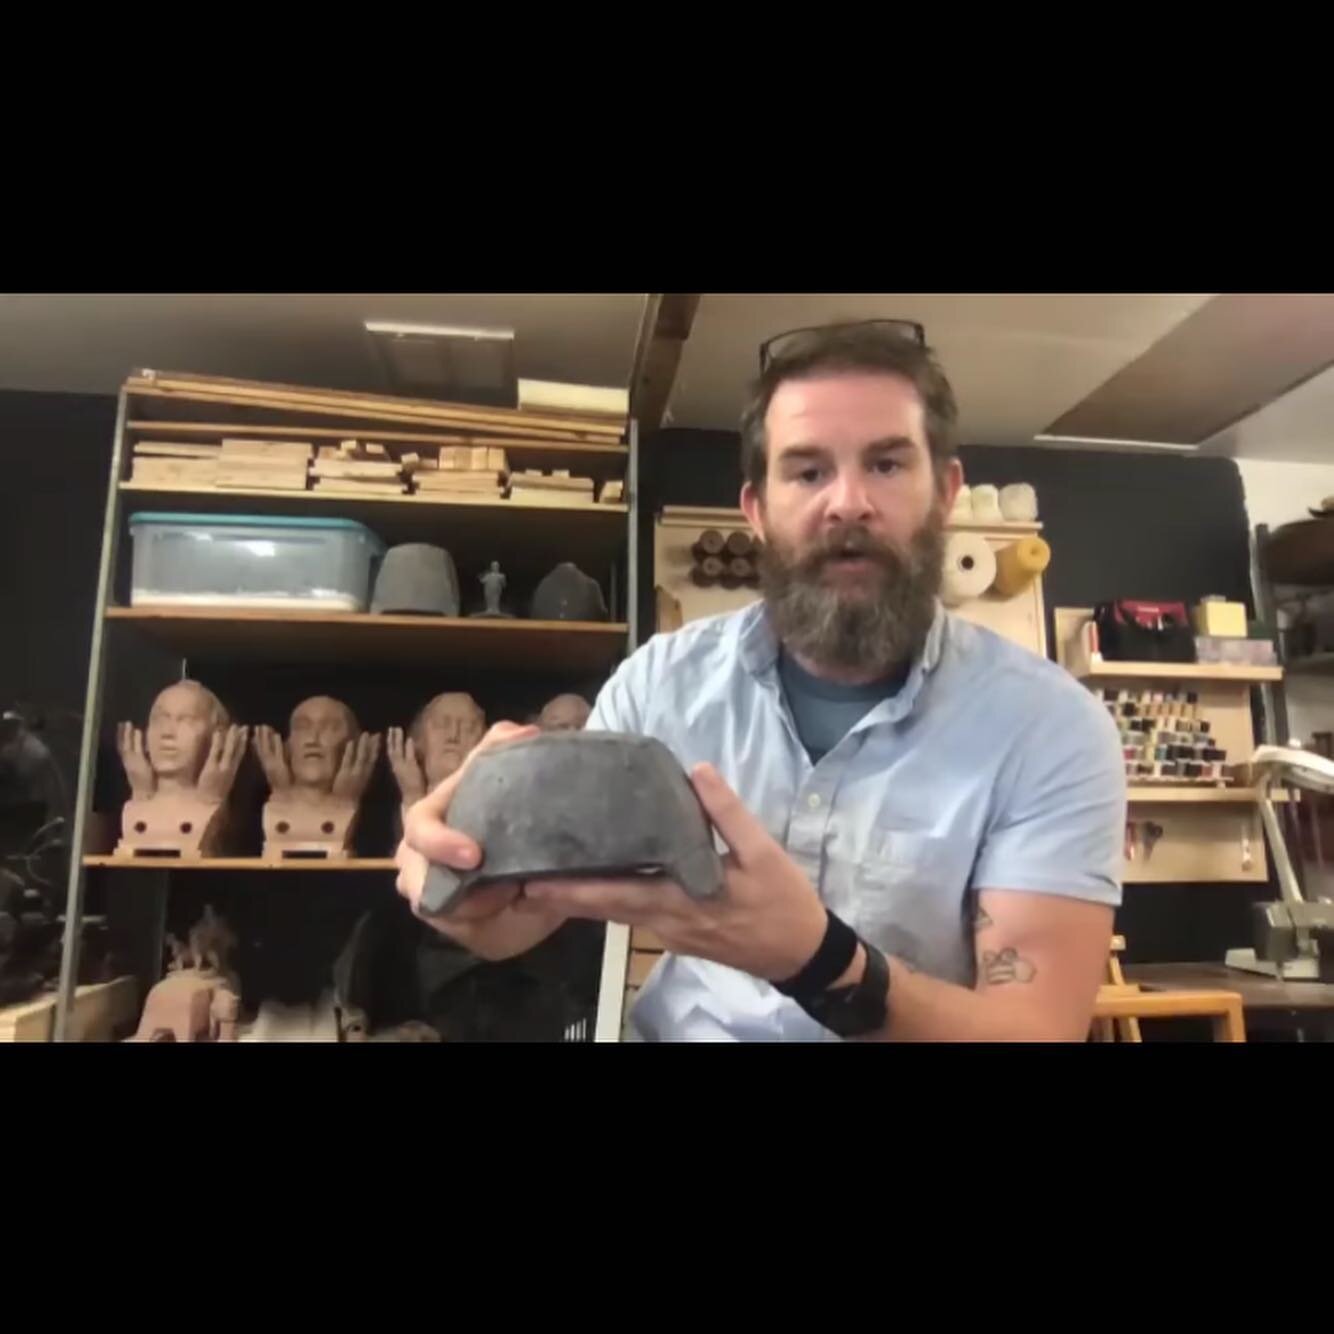 Screen shots of a video from Arrowmont&rsquo;s Meet the Artist series to promote the artist auction. This years auction is more important than most for obvious reasons, please go take a look and support a special place! I&rsquo;m ambivalent about any